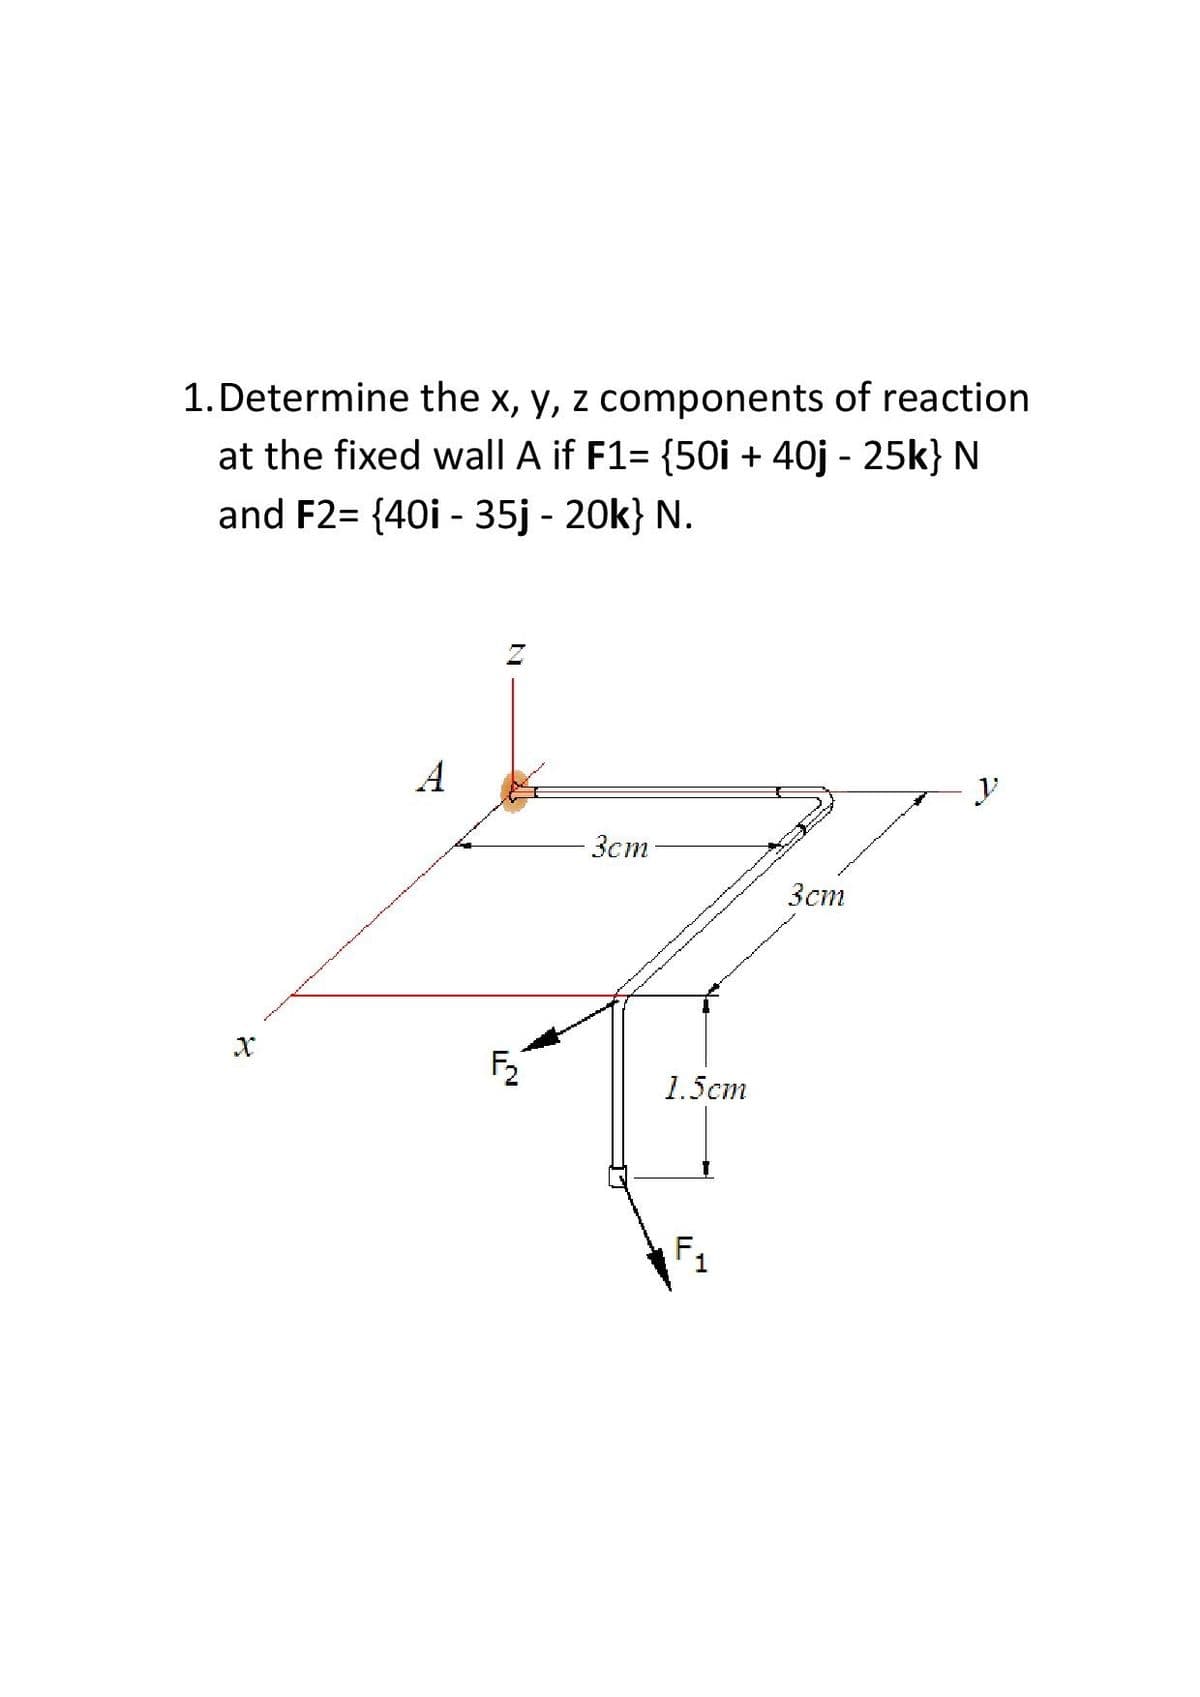 1.Determine the x, y, z components of reaction
at the fixed wall A if F1= {50i + 40j - 25k} N
and F2= {40i - 35j - 20k} N.
A
y
-3cm-
Зст
1.5ст
F1
